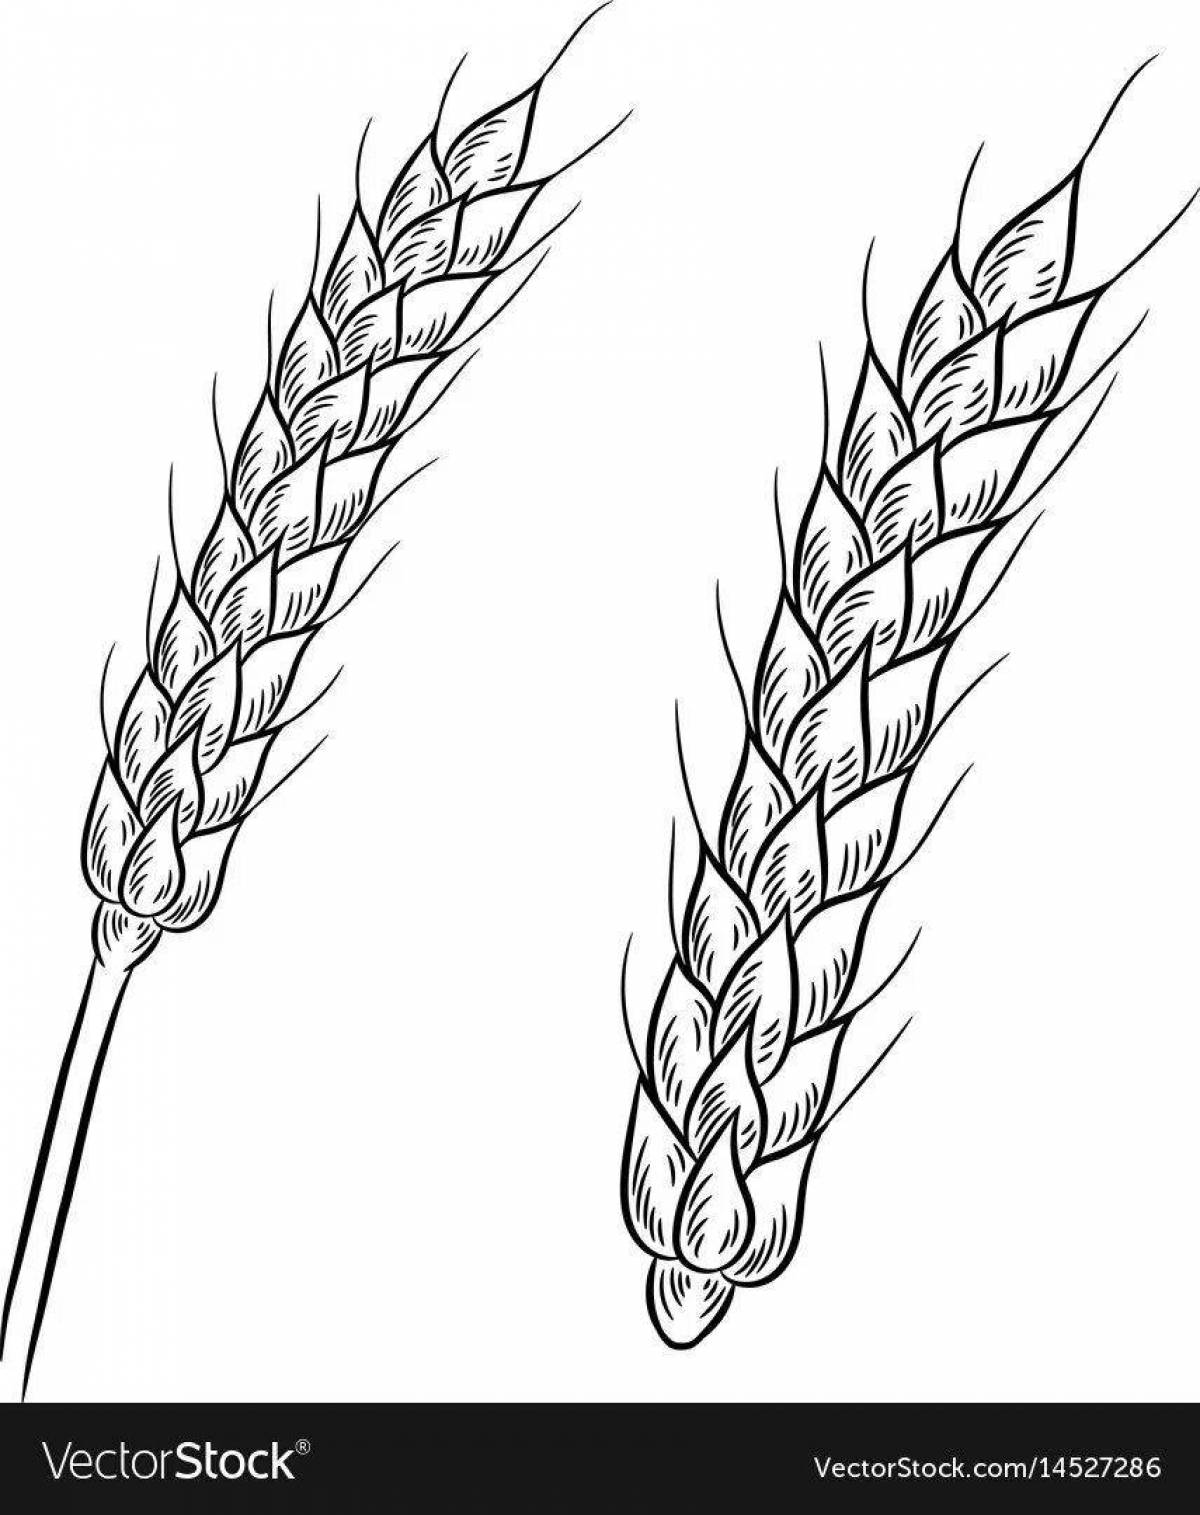 Adorable spikelet coloring for minors